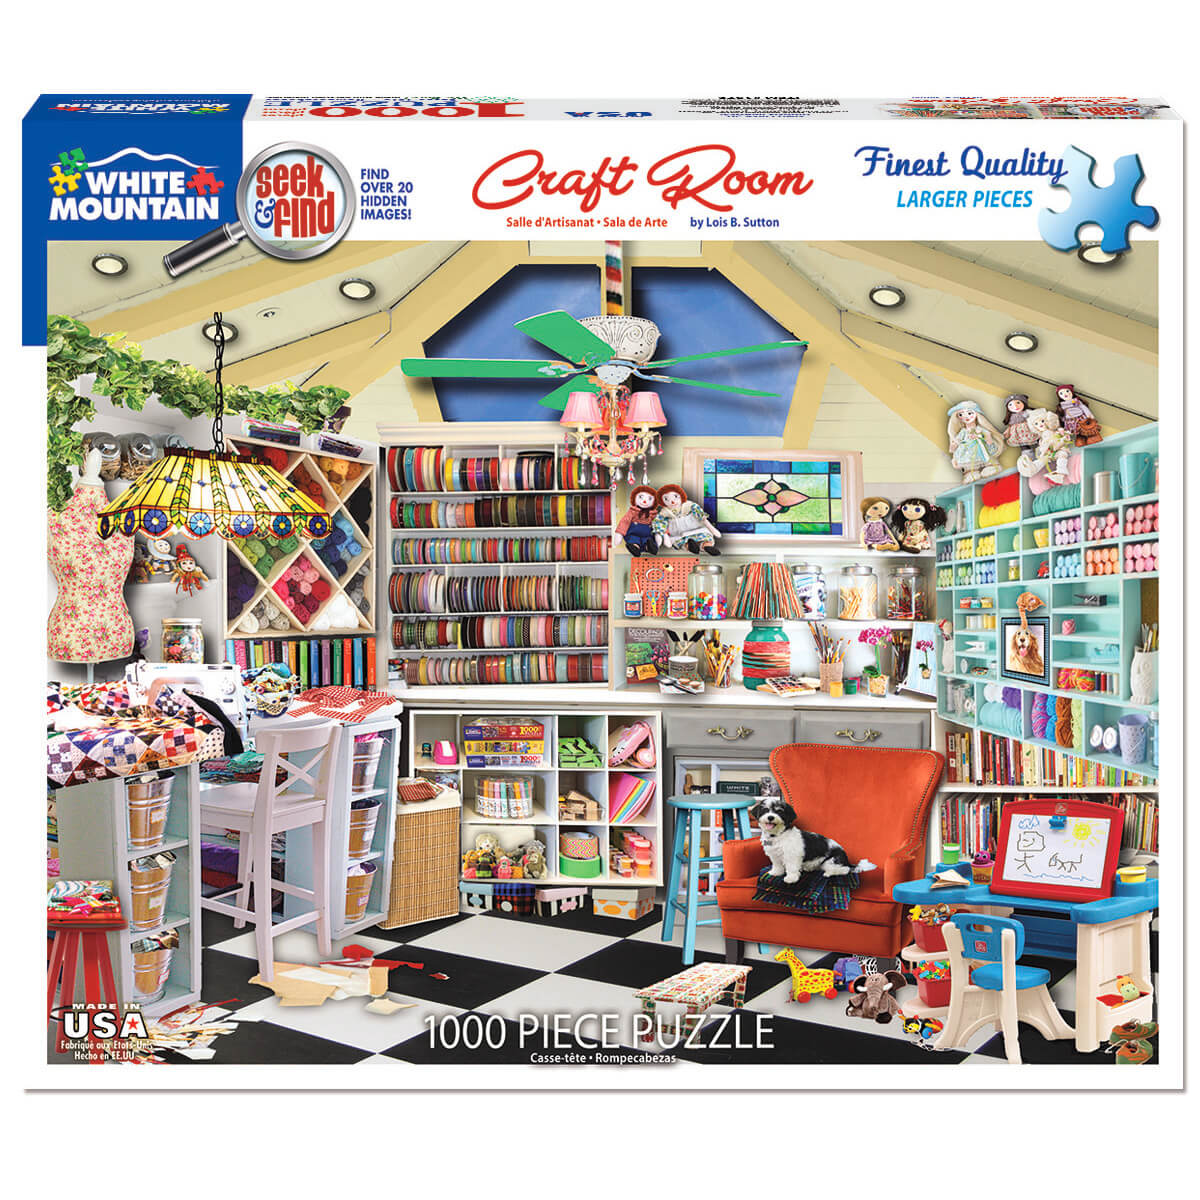 White Mountain Puzzles Craft Room Seek and Find 1000 Piece Jigsaw Puzzle